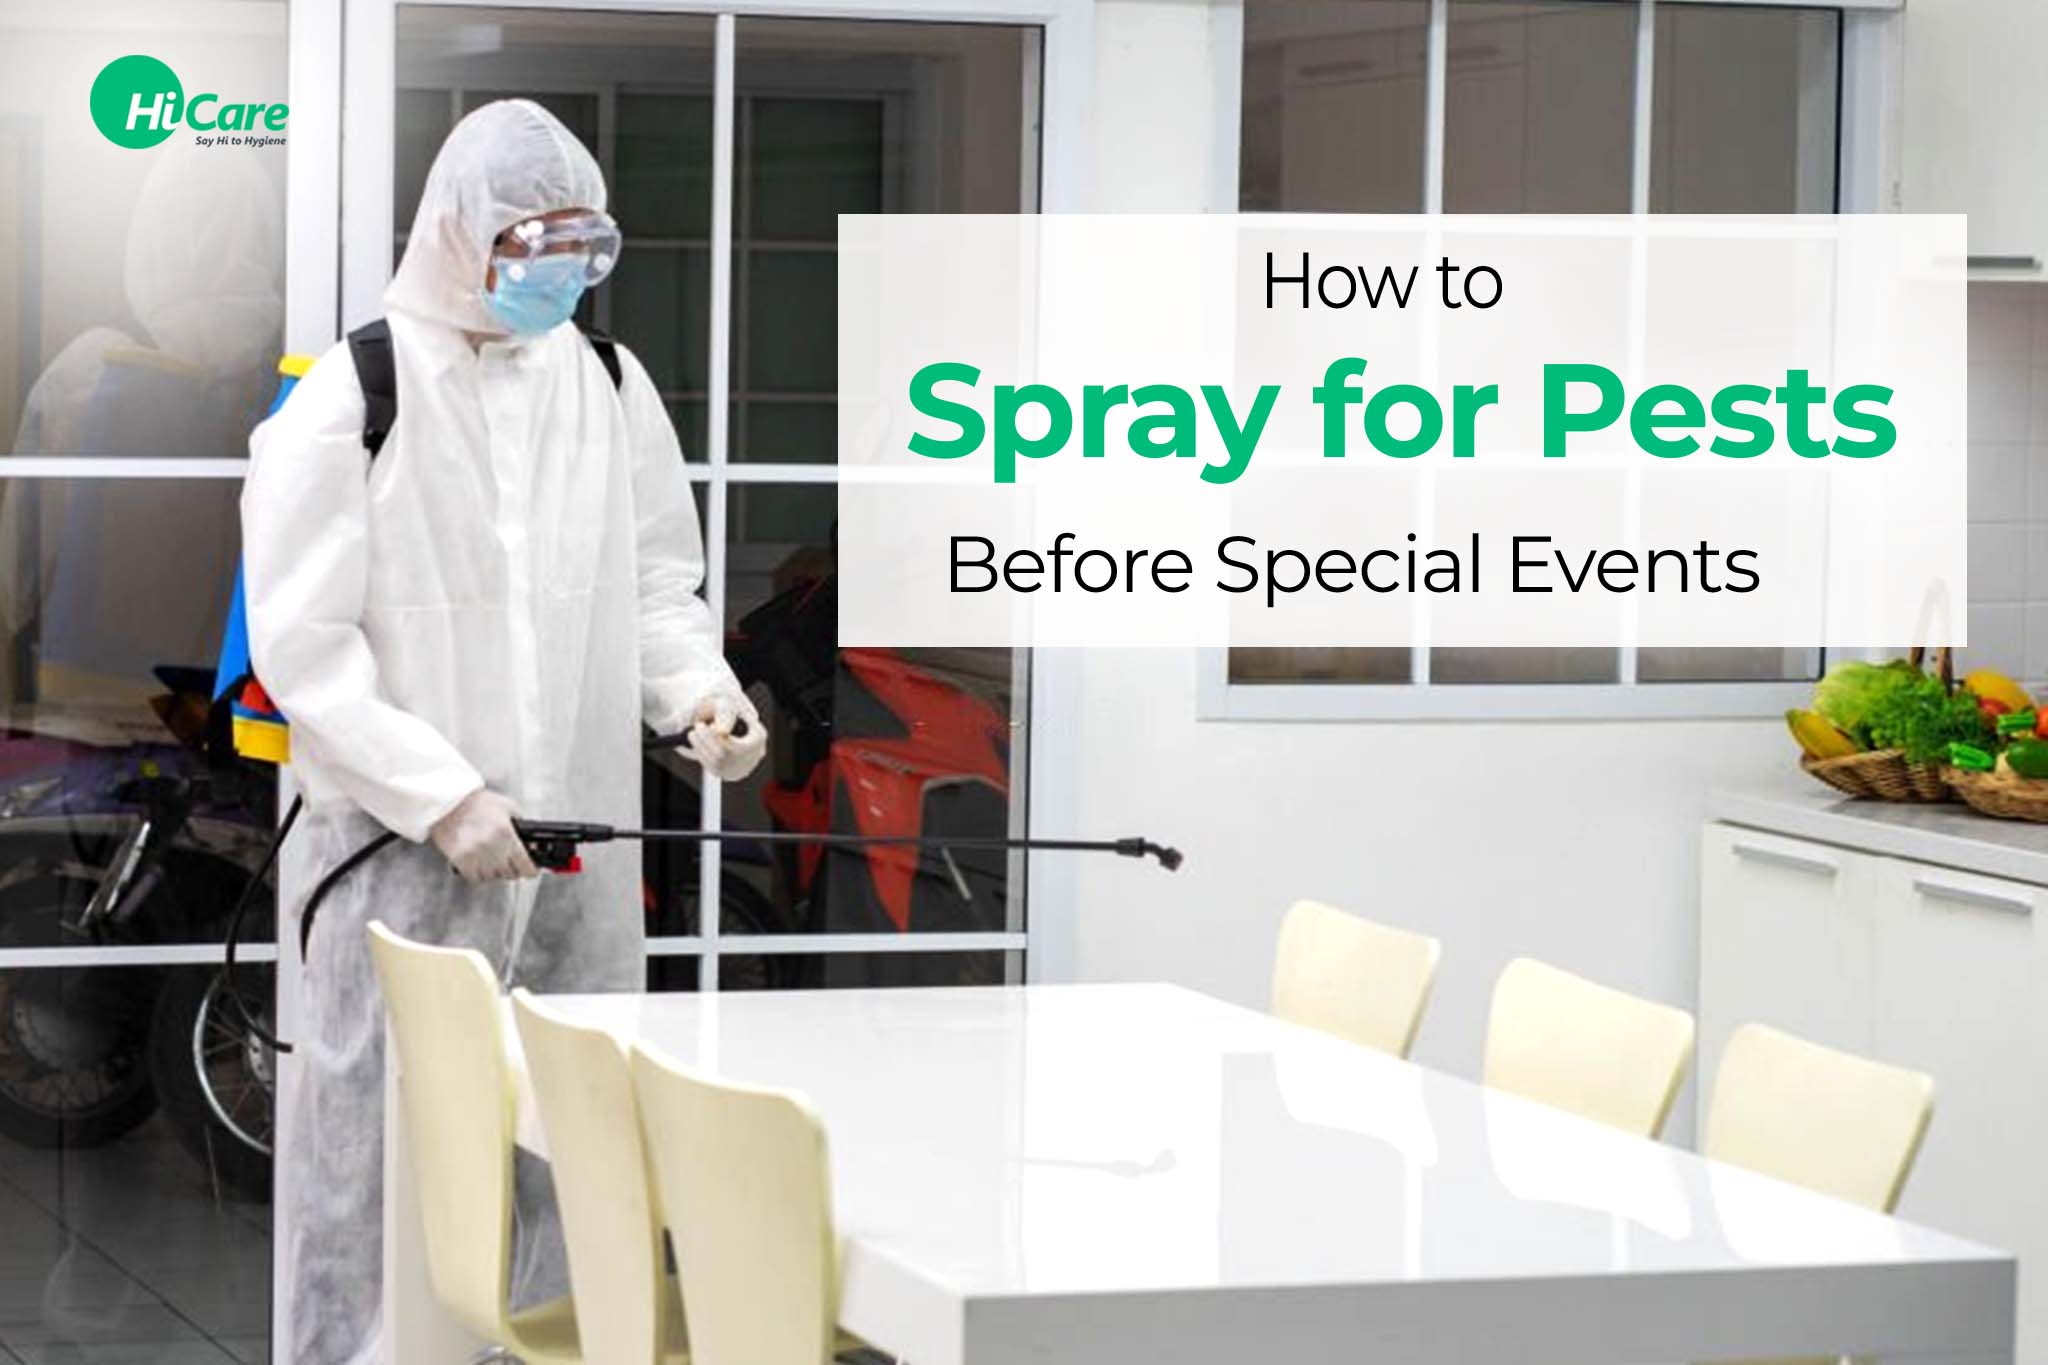 How to Spray for Pests Before Special Events